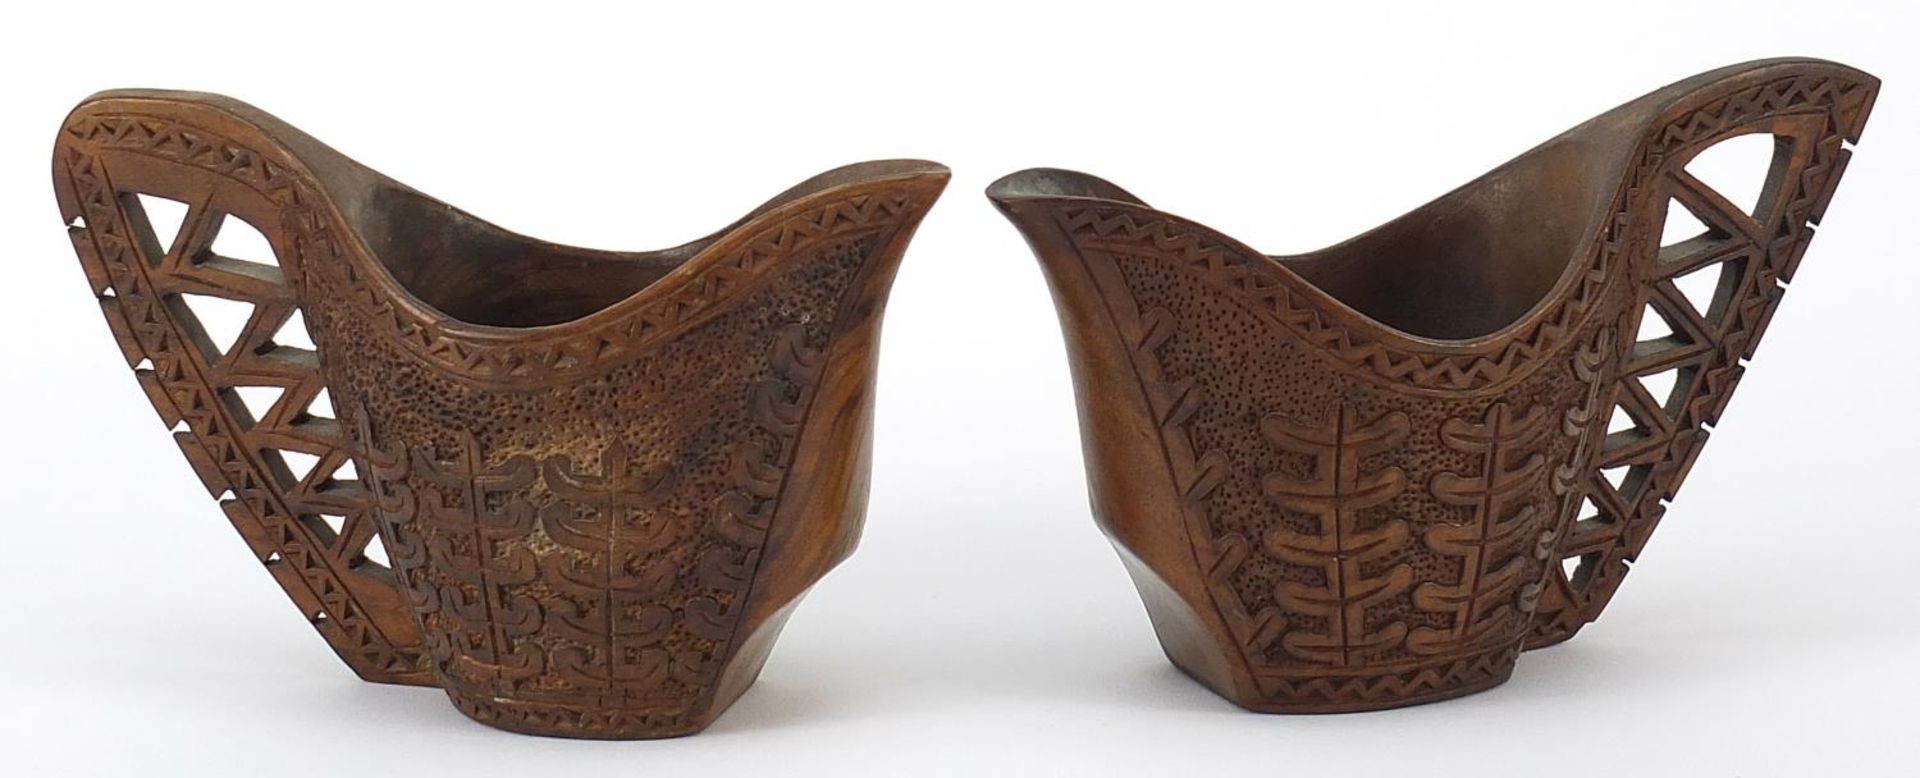 Pair of Scandinavian carved hardwood cups, the largest approximately 15.5cm